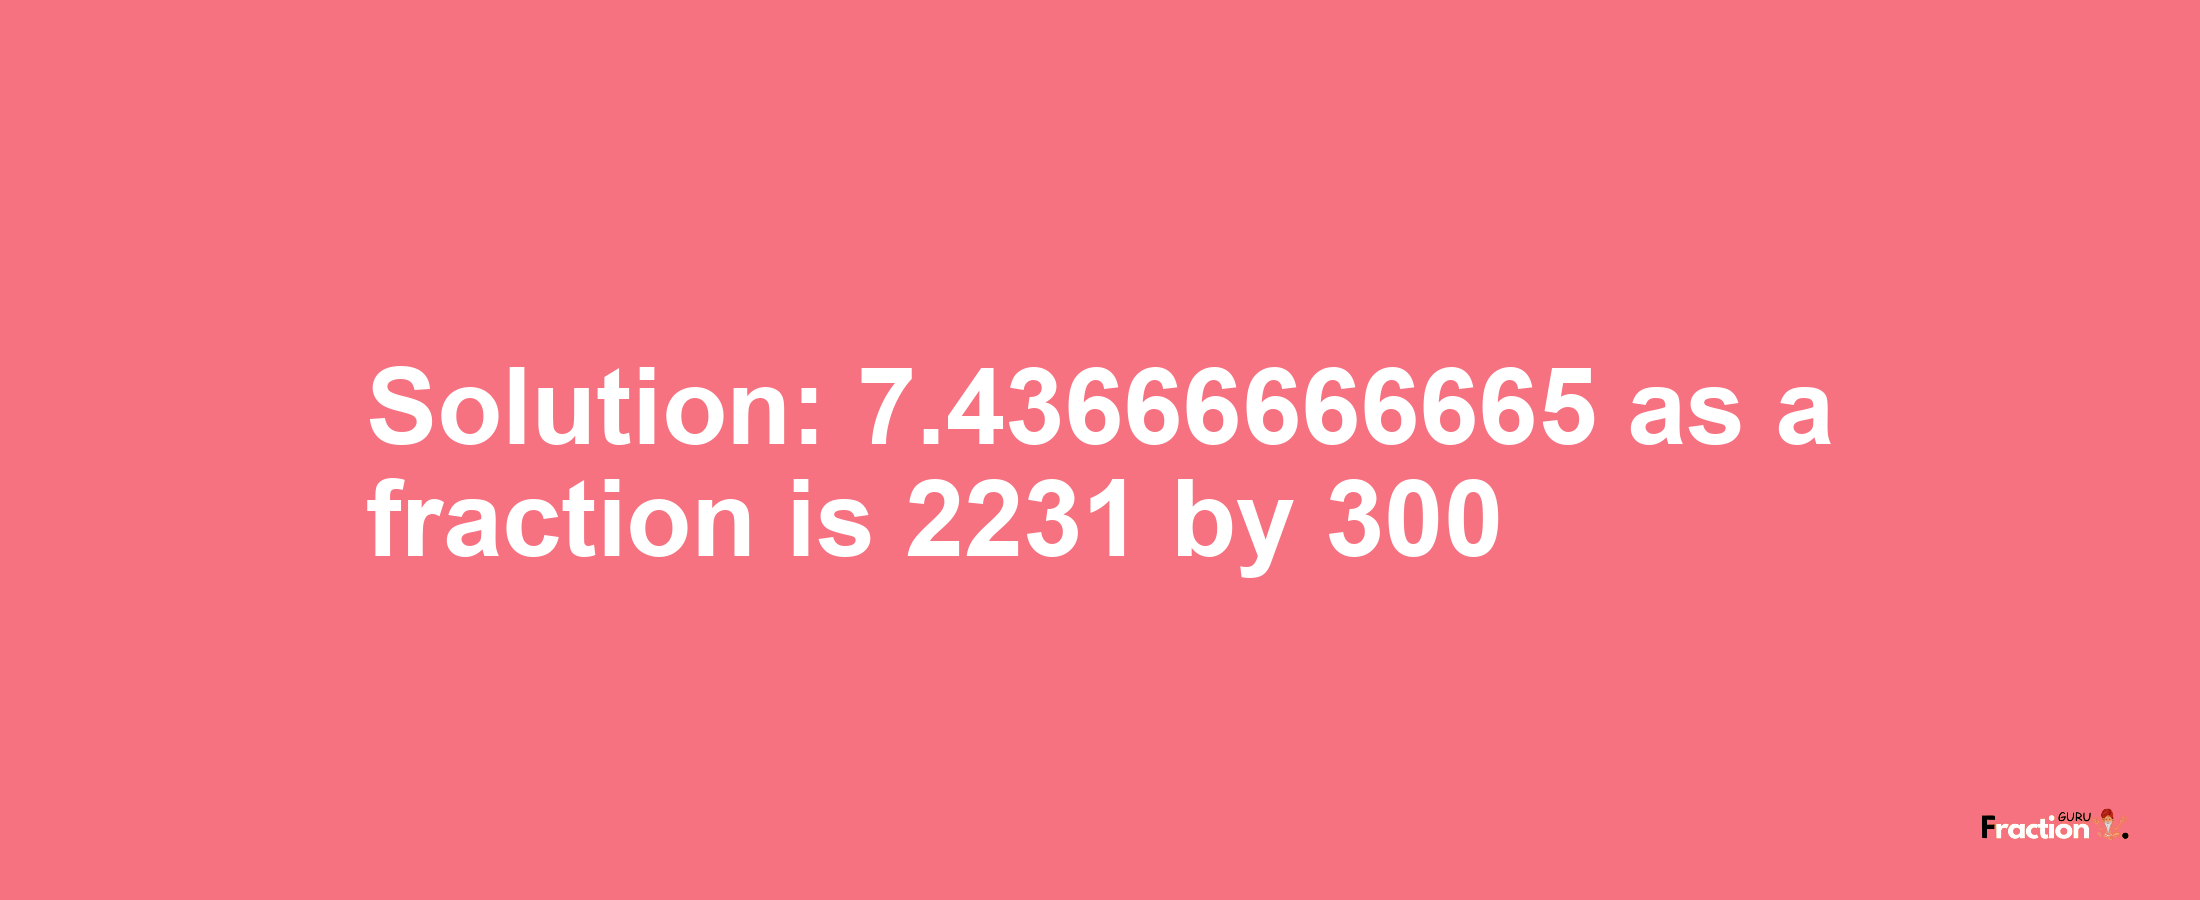 Solution:7.43666666665 as a fraction is 2231/300